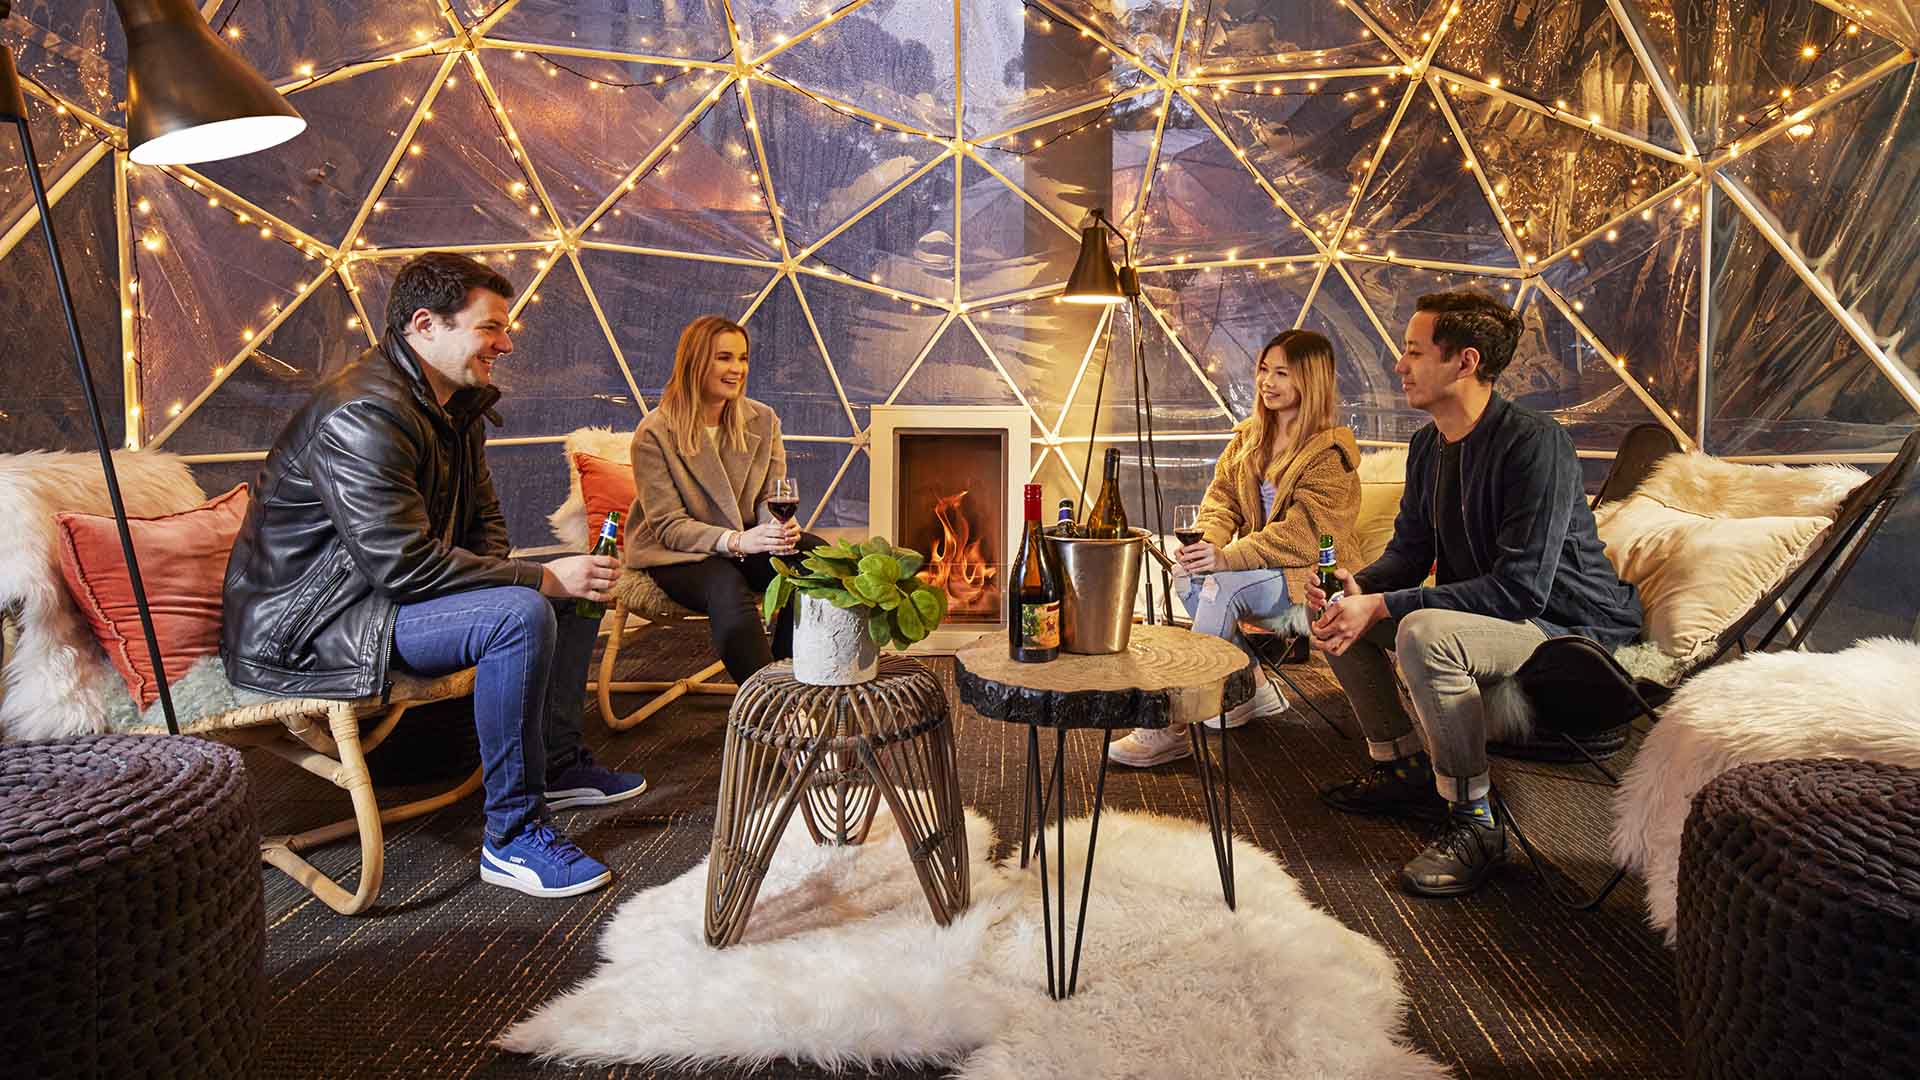 Element Richmond Hotel Is Adding Free Karaoke, Igloos and a Pop-Up Cinema to Your Next Staycation